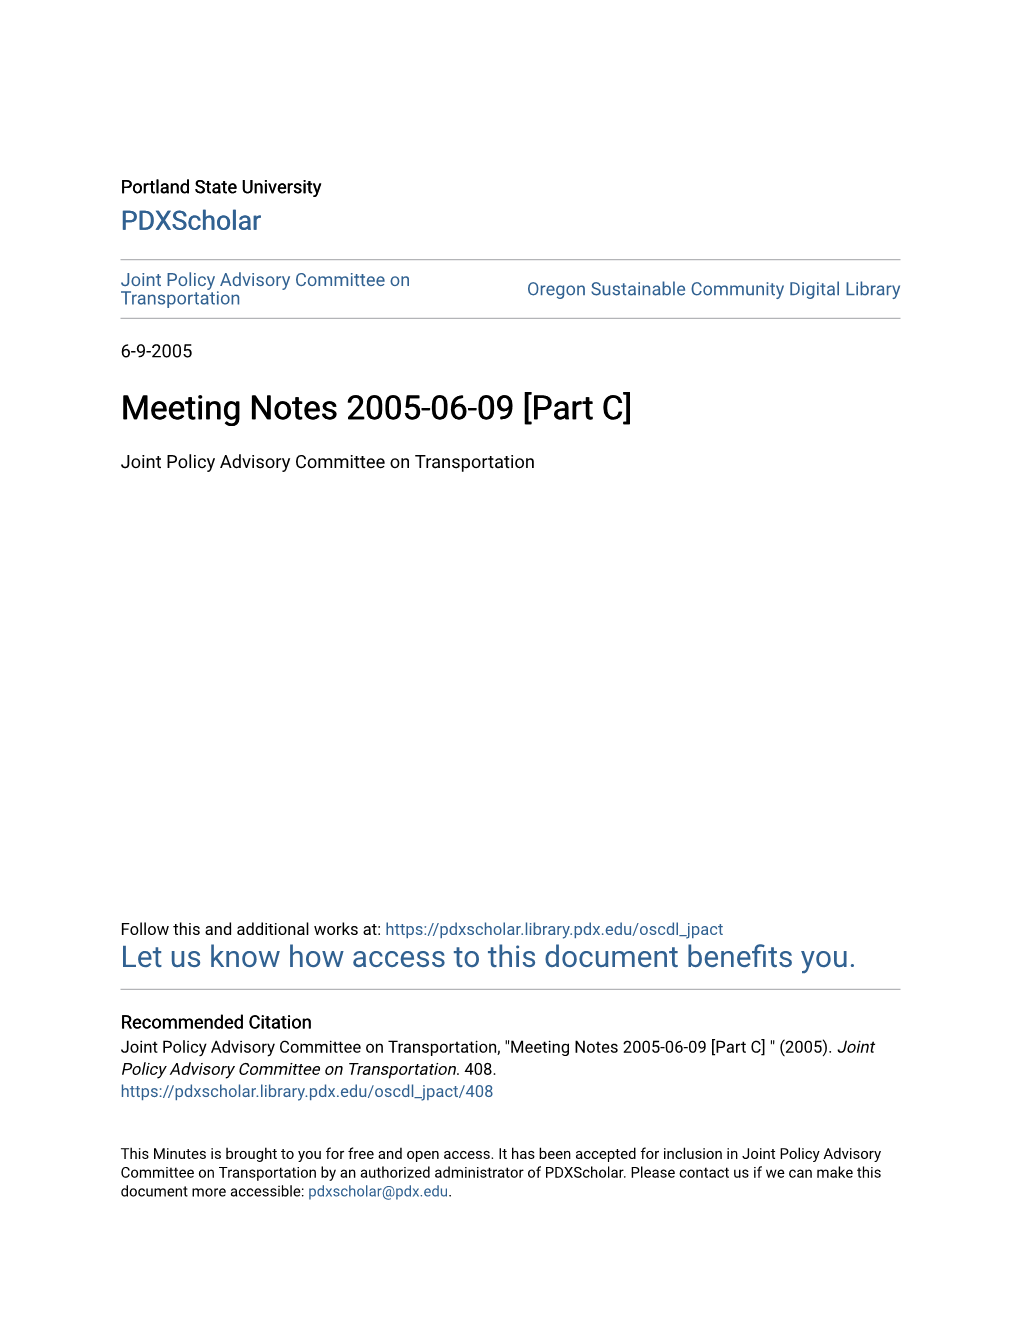 Meeting Notes 2005-06-09 [Part C]